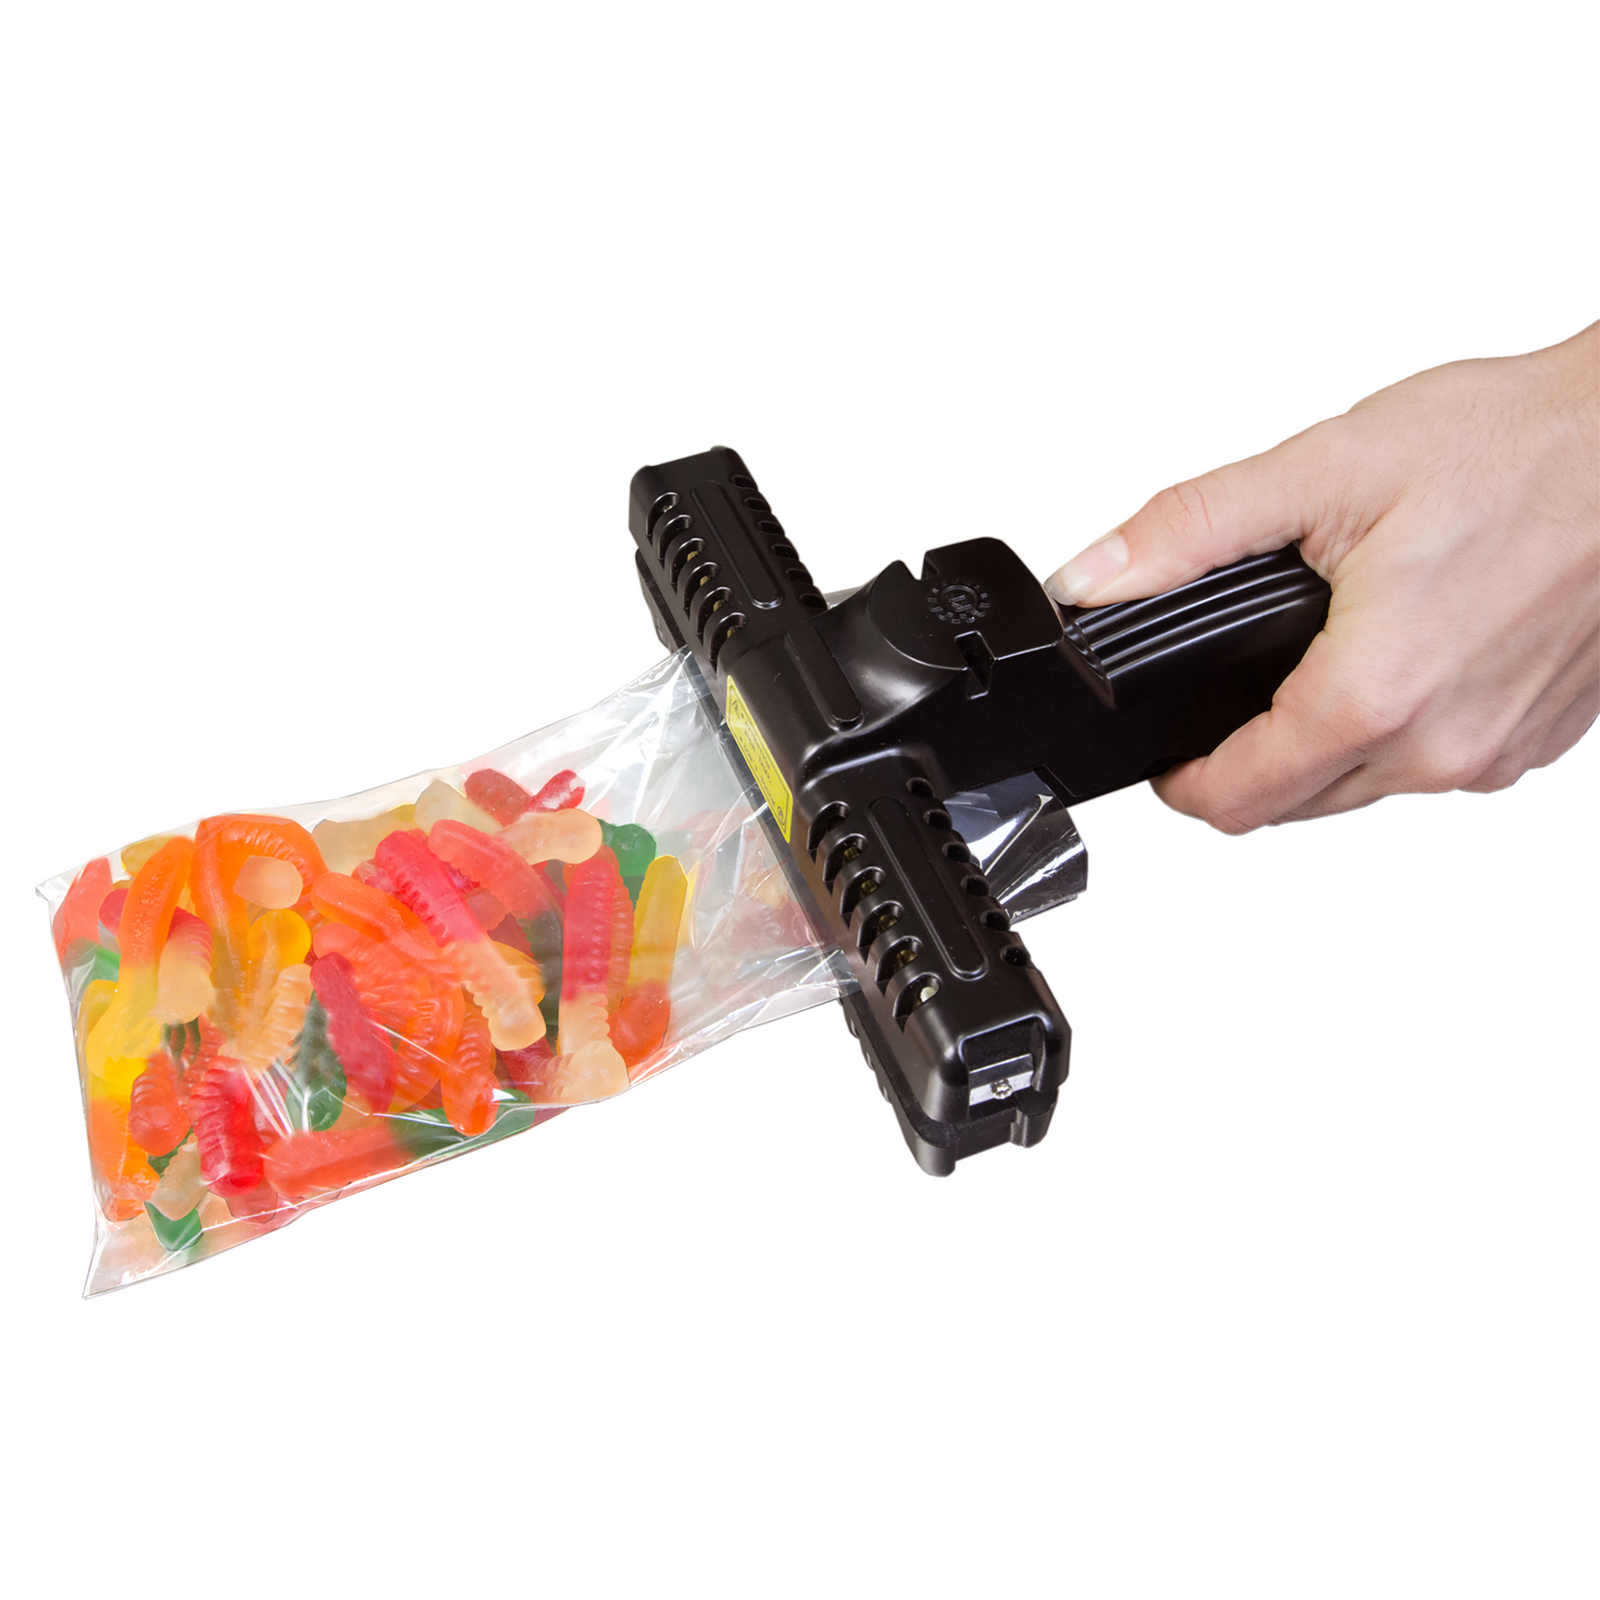 person sealing plastic bag filled with colorful gummy worms using black hand-held crimp sealer